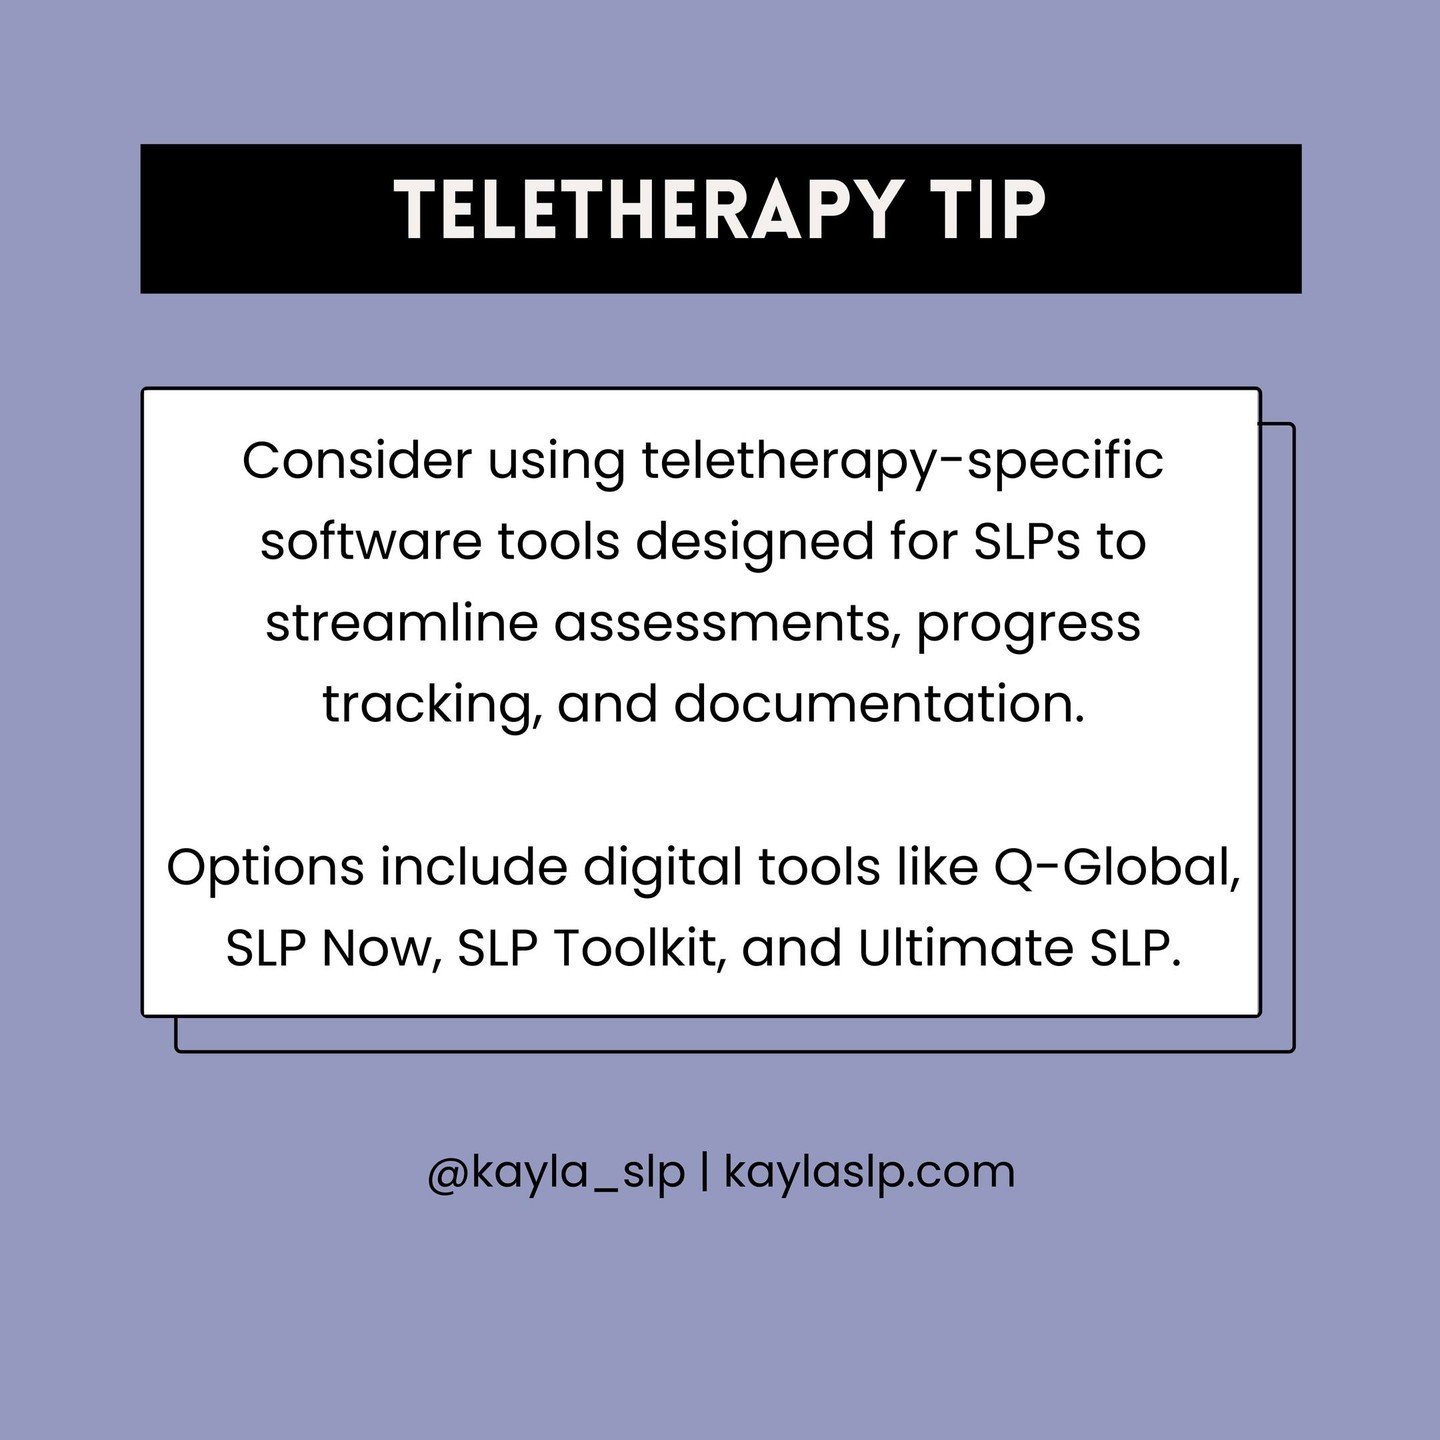 Want to make your life easier and save time? Check out these awesome tools that make teletherapy a breeze!  Streamline assessments, progress tracking, and documentation with apps like Q-global, SLP Now, SLP Toolkit, and Ultimate SLP. Explore how they